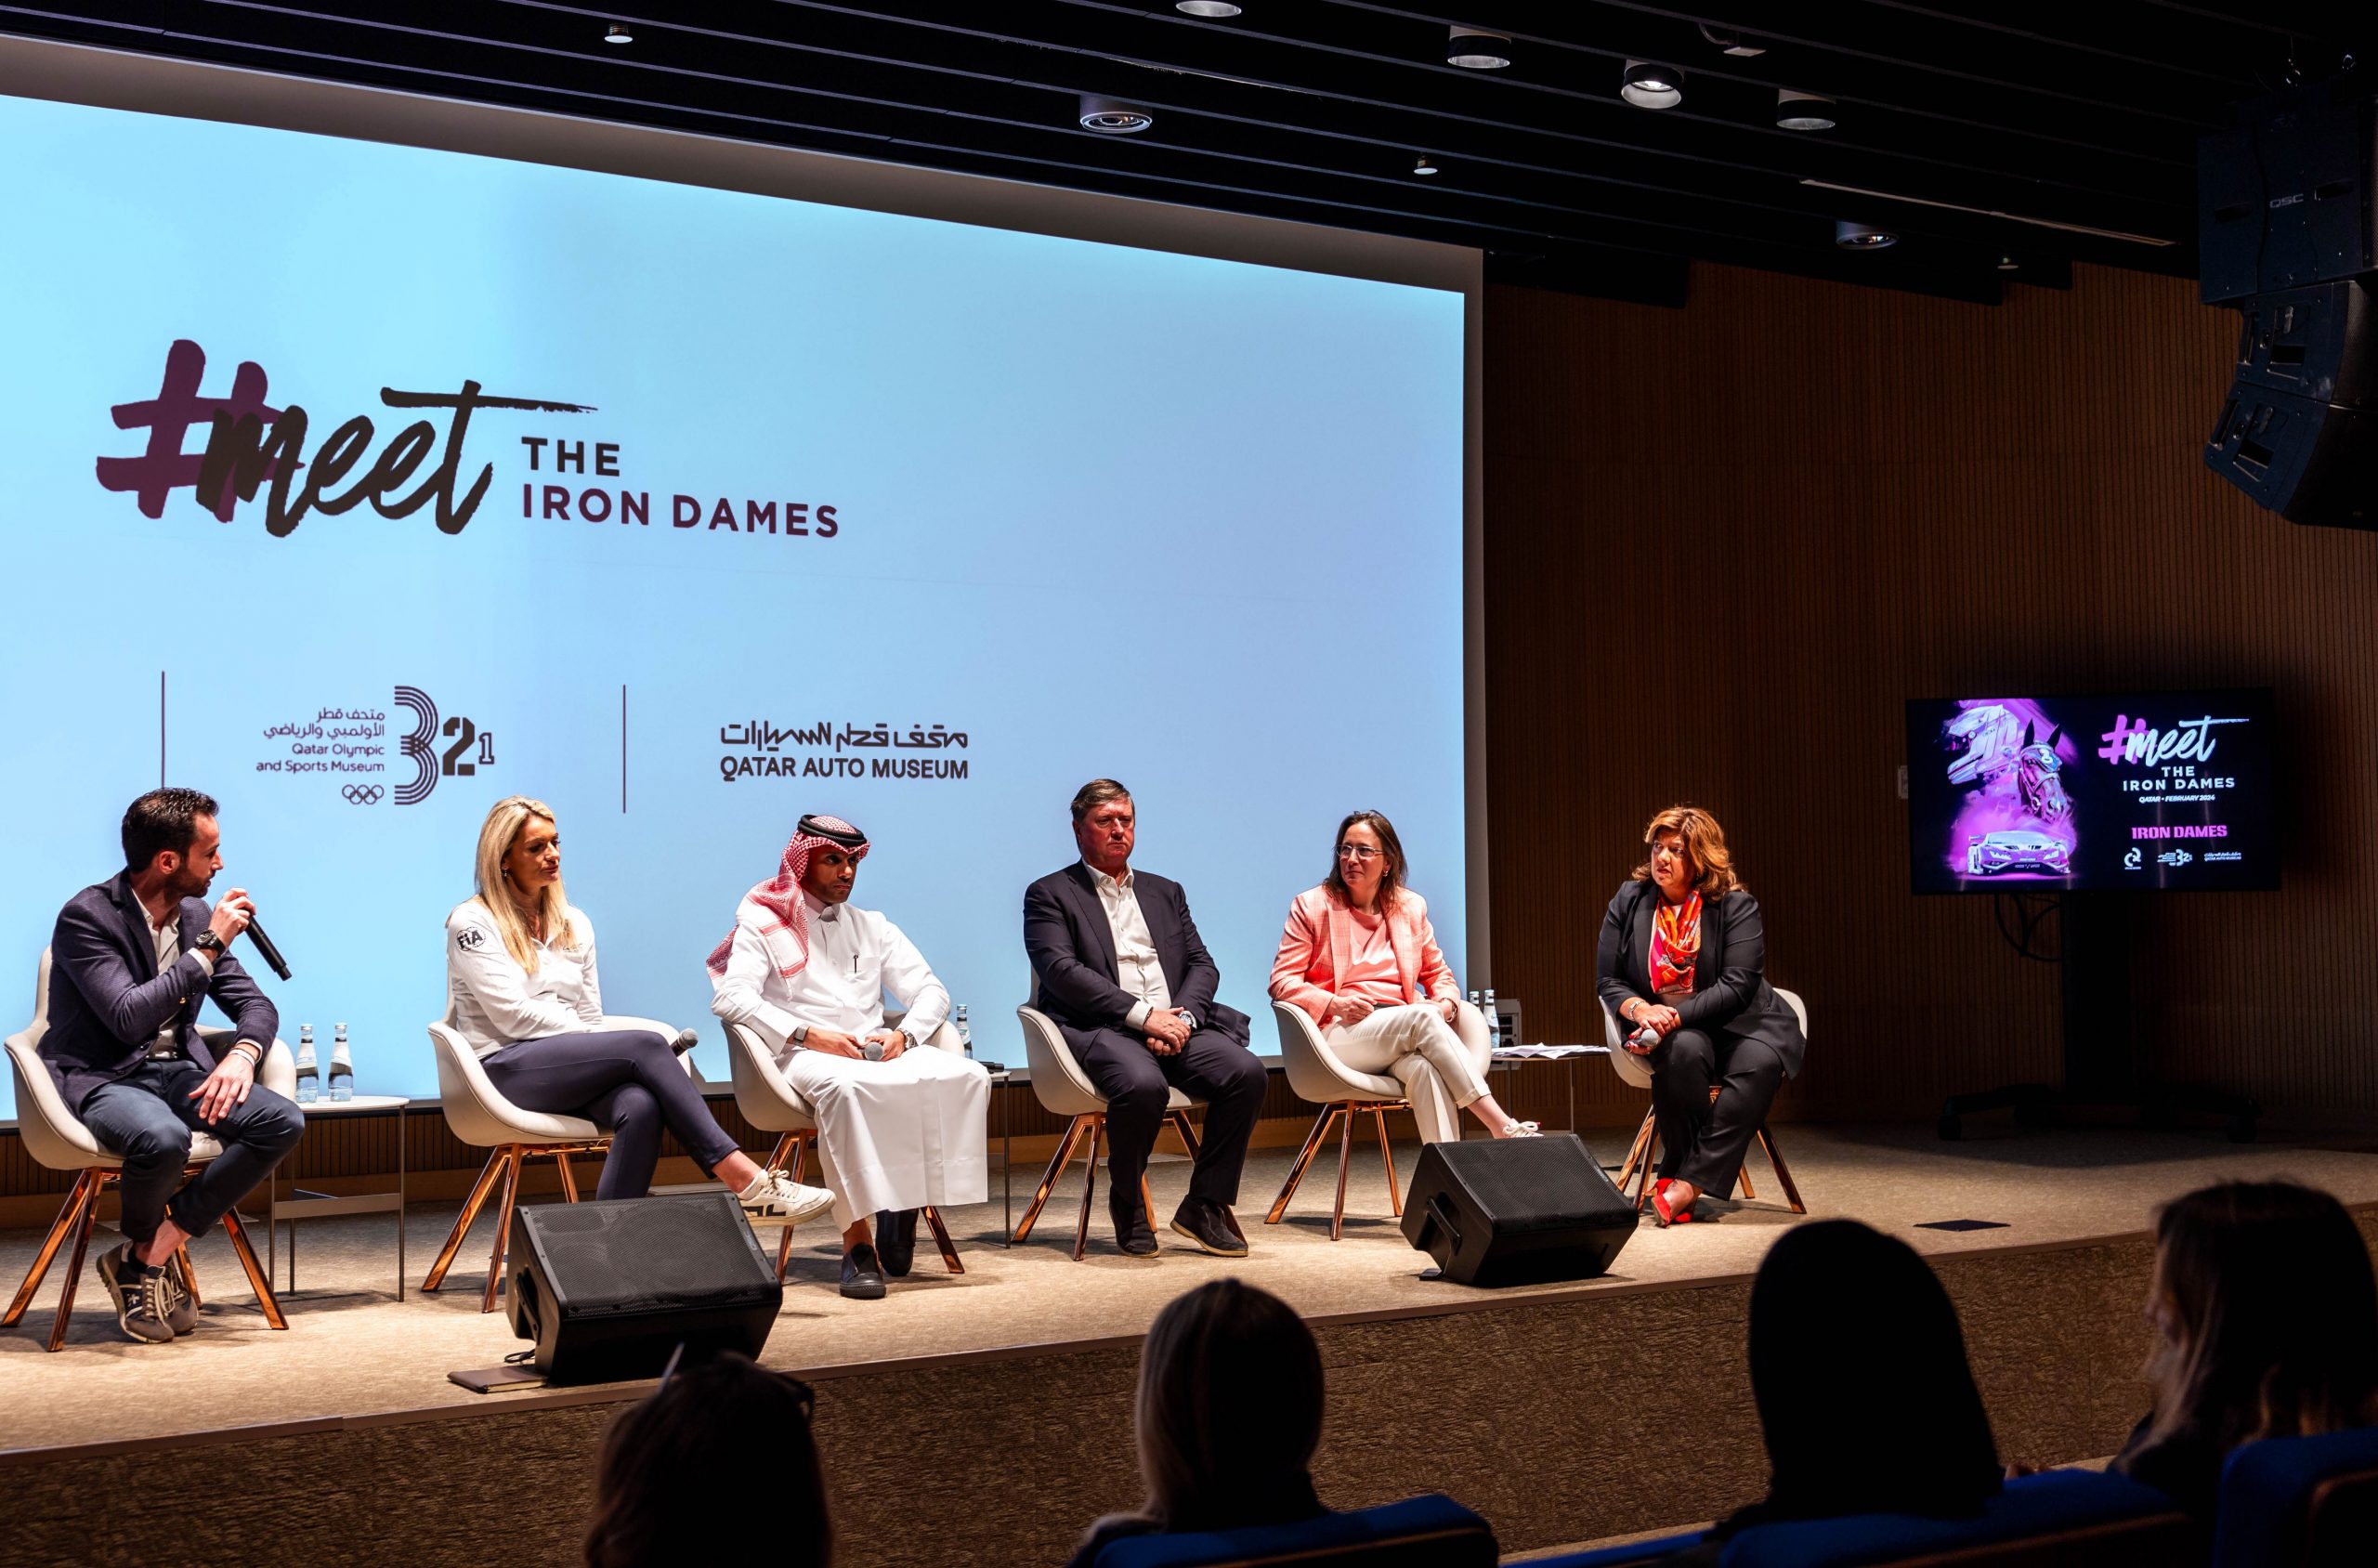 EMPOWERING WOMEN: SUCCESSFUL DEBUT OF ‘MEET THE IRON DAMES’ EVENT IN QATAR